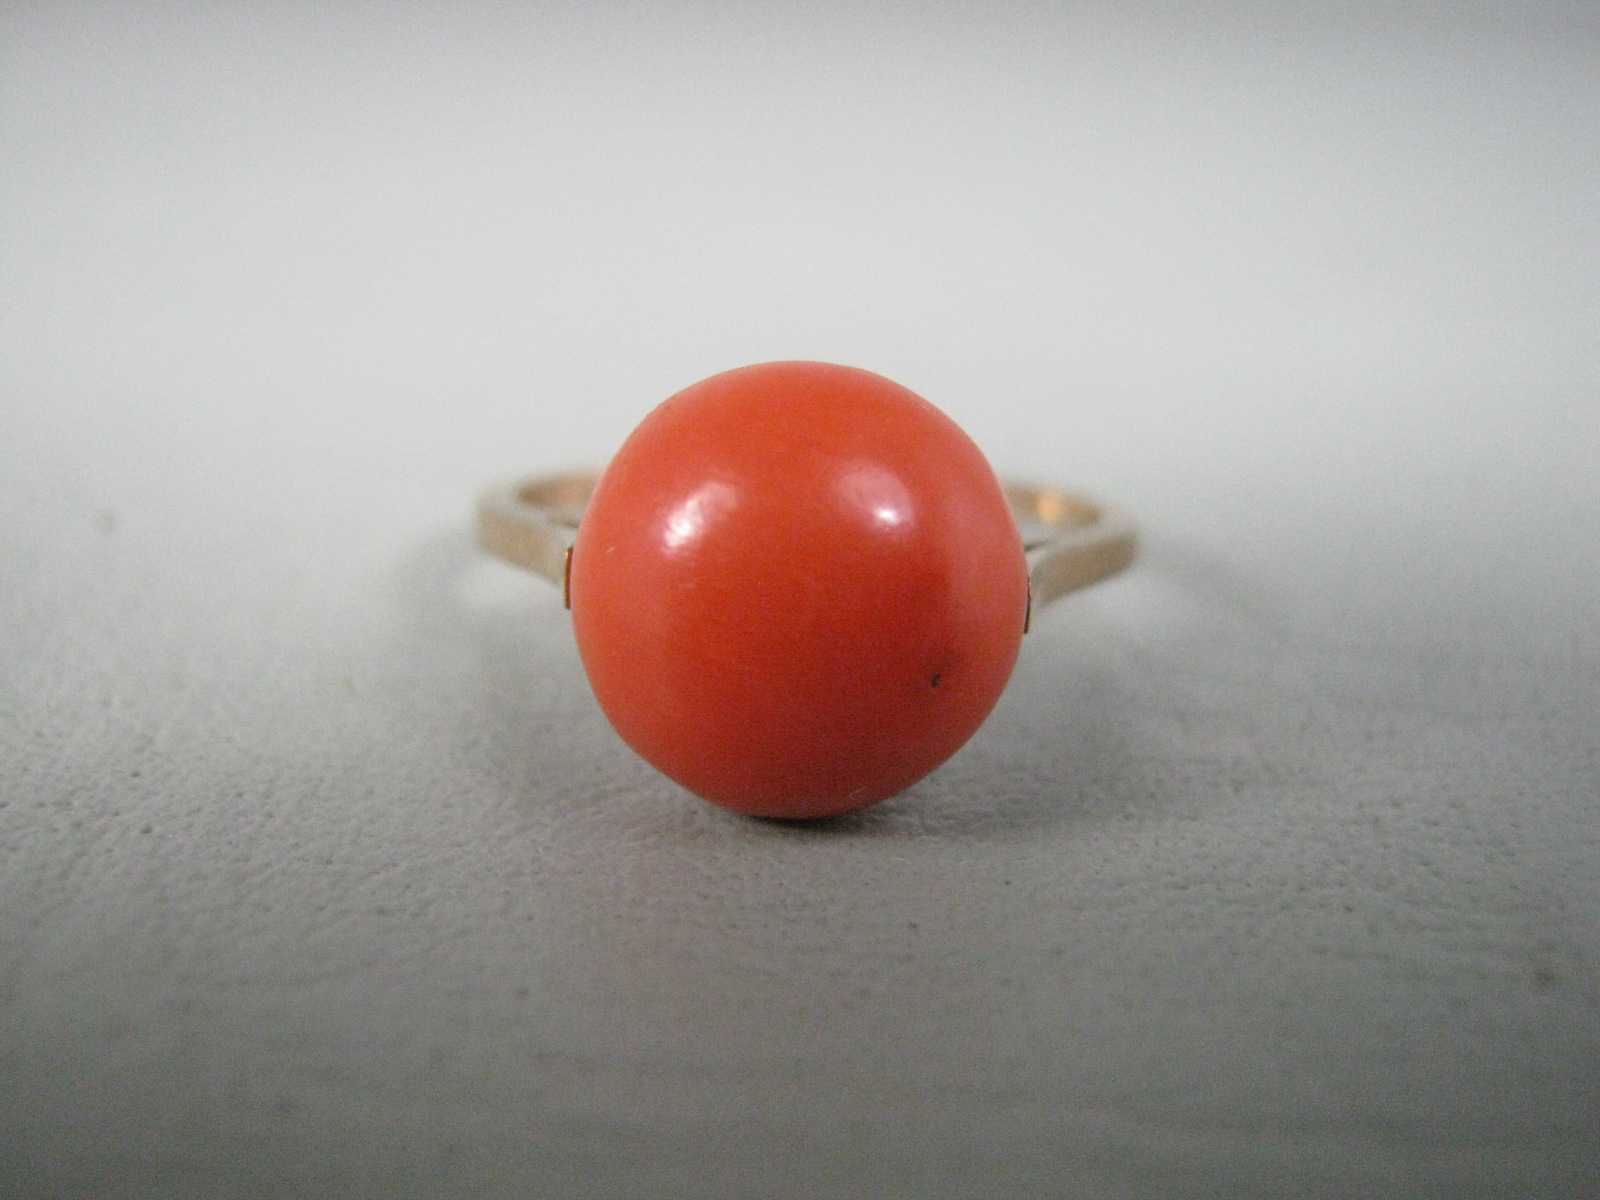 Vtg Antique 585 14K 14 Karat Yellow Gold Red Coral Ring Size 7 Estate Jewelry NR 1